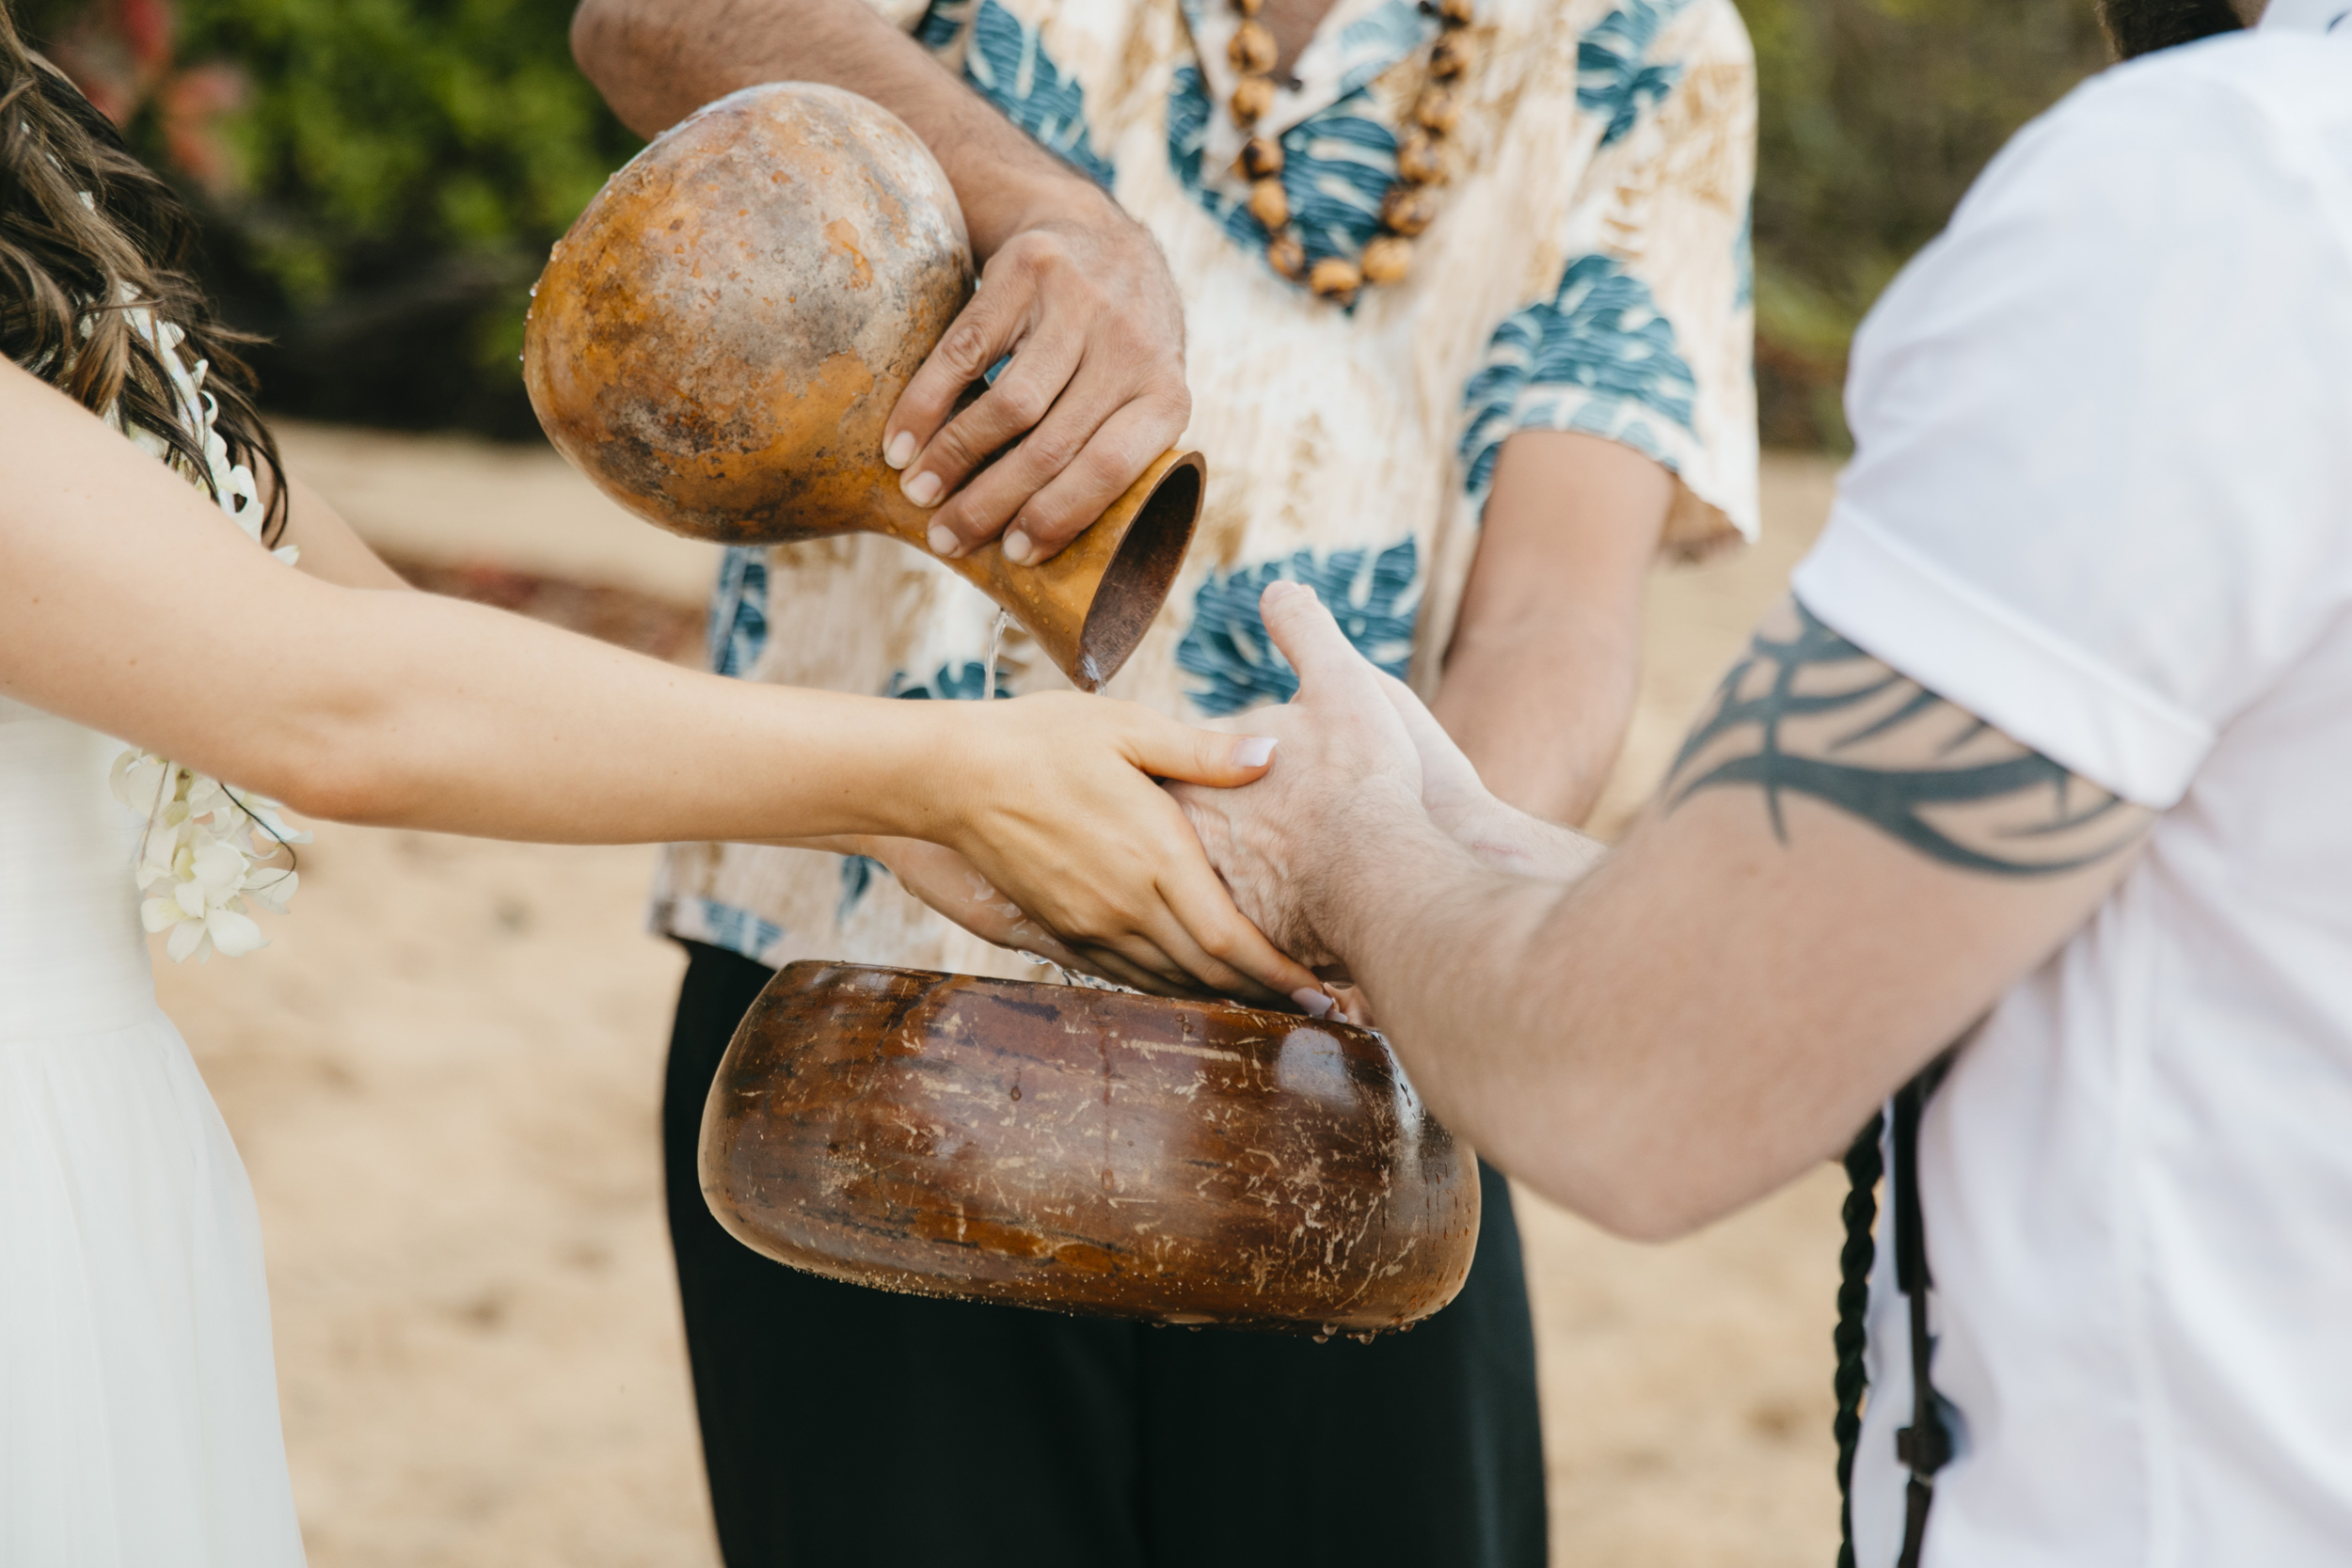 Wedding Ceremony at Tunnels Beach with Kauai Adventure Elopement photographers Colby and Jess